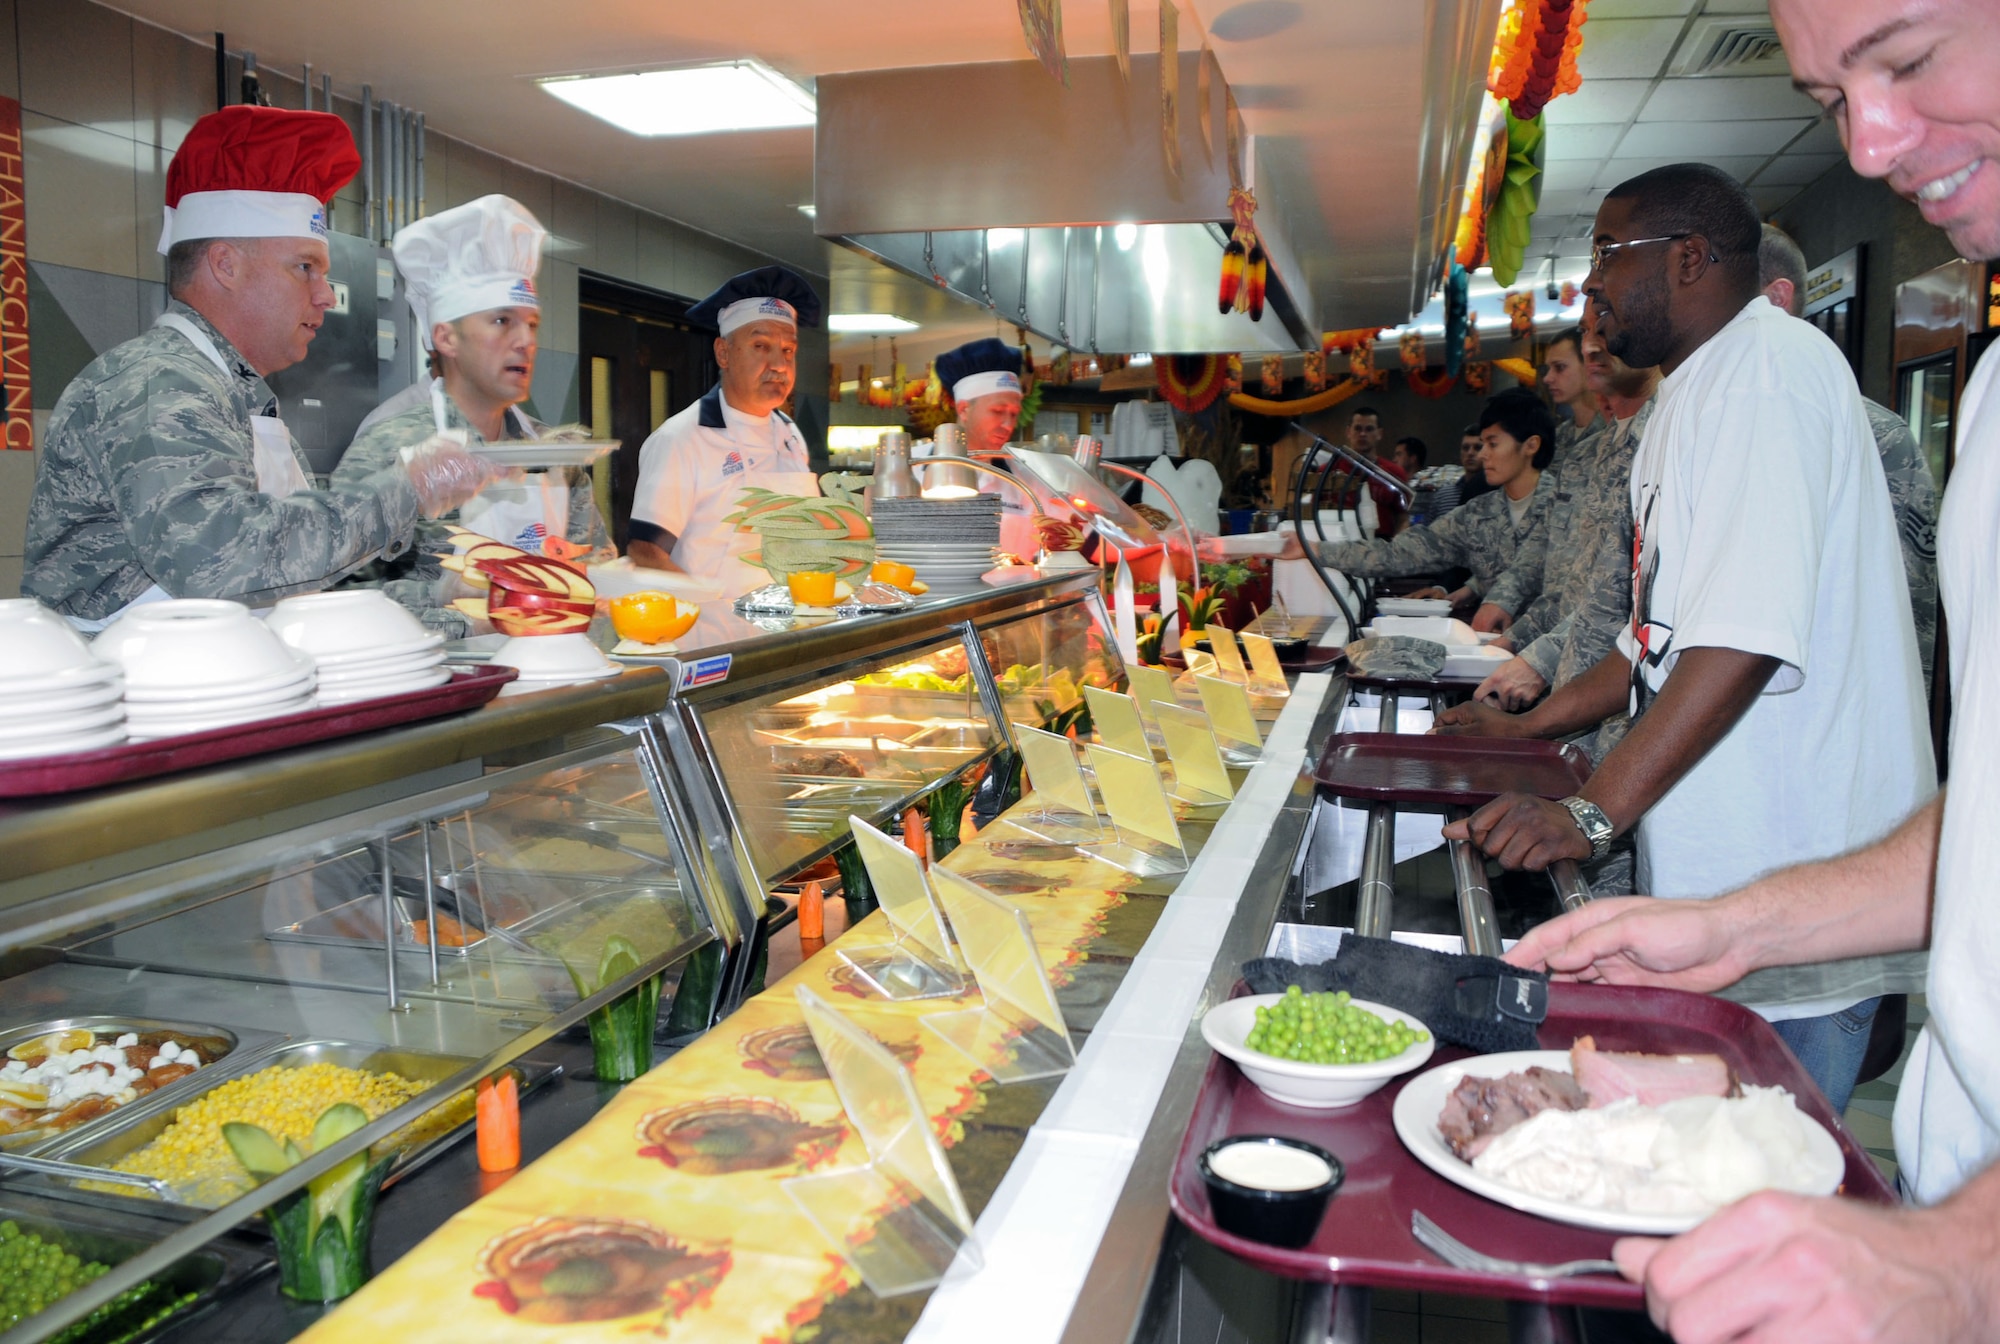 Col. Eric Beene, 39th Air Base Wing commander and Incirlik first sergeants serve Thanksgiving lunch to Airmen from all around base Thursday, Nov. 26, 2009, at the Sultan’s Inn Dining Facility. Members of the dining facility prepared turkey, roast beef, sweet potatoes and many more Thanksgiving treats for Airmen to eat and spend time together during the holiday. (U.S. Air Force photo/Senior Airman Sara Csurilla)